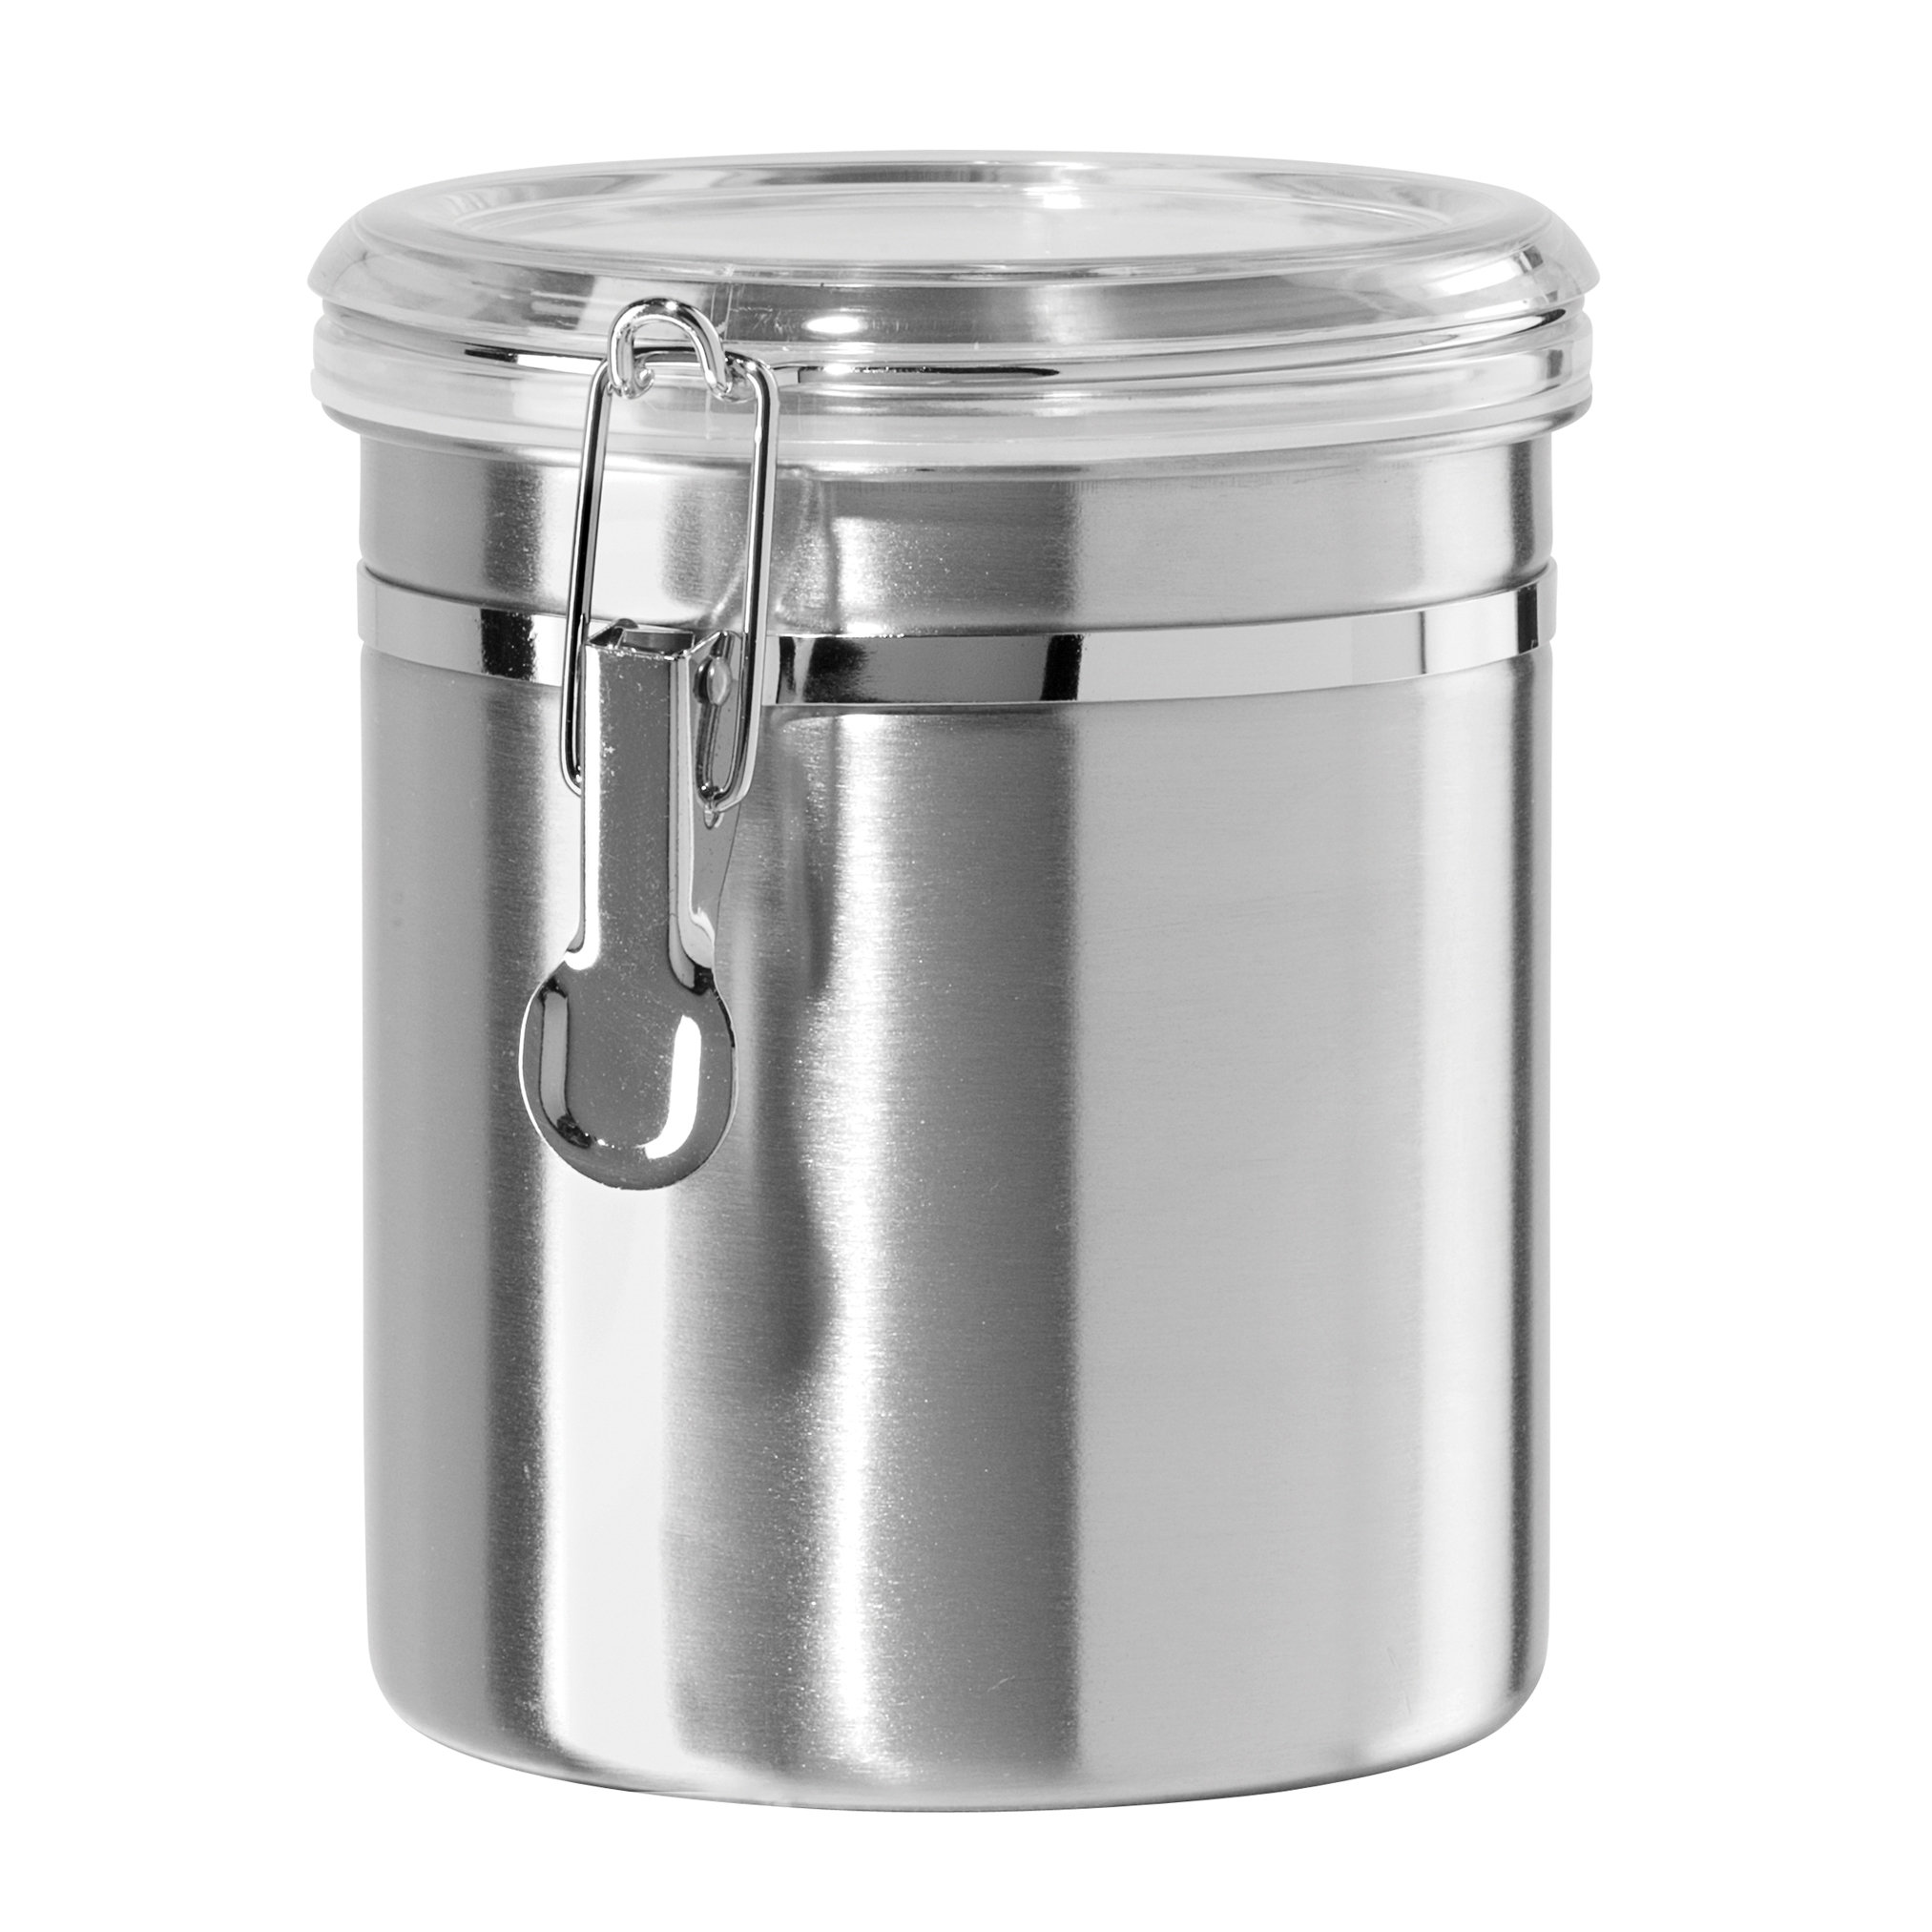 Oggi Jumbo 8 Stainless Steel Flour Clamp Canister - Airtight Food Storage  Container Ideal for Kitchen & Pantry Storage of Flour or other Bulk, Dry